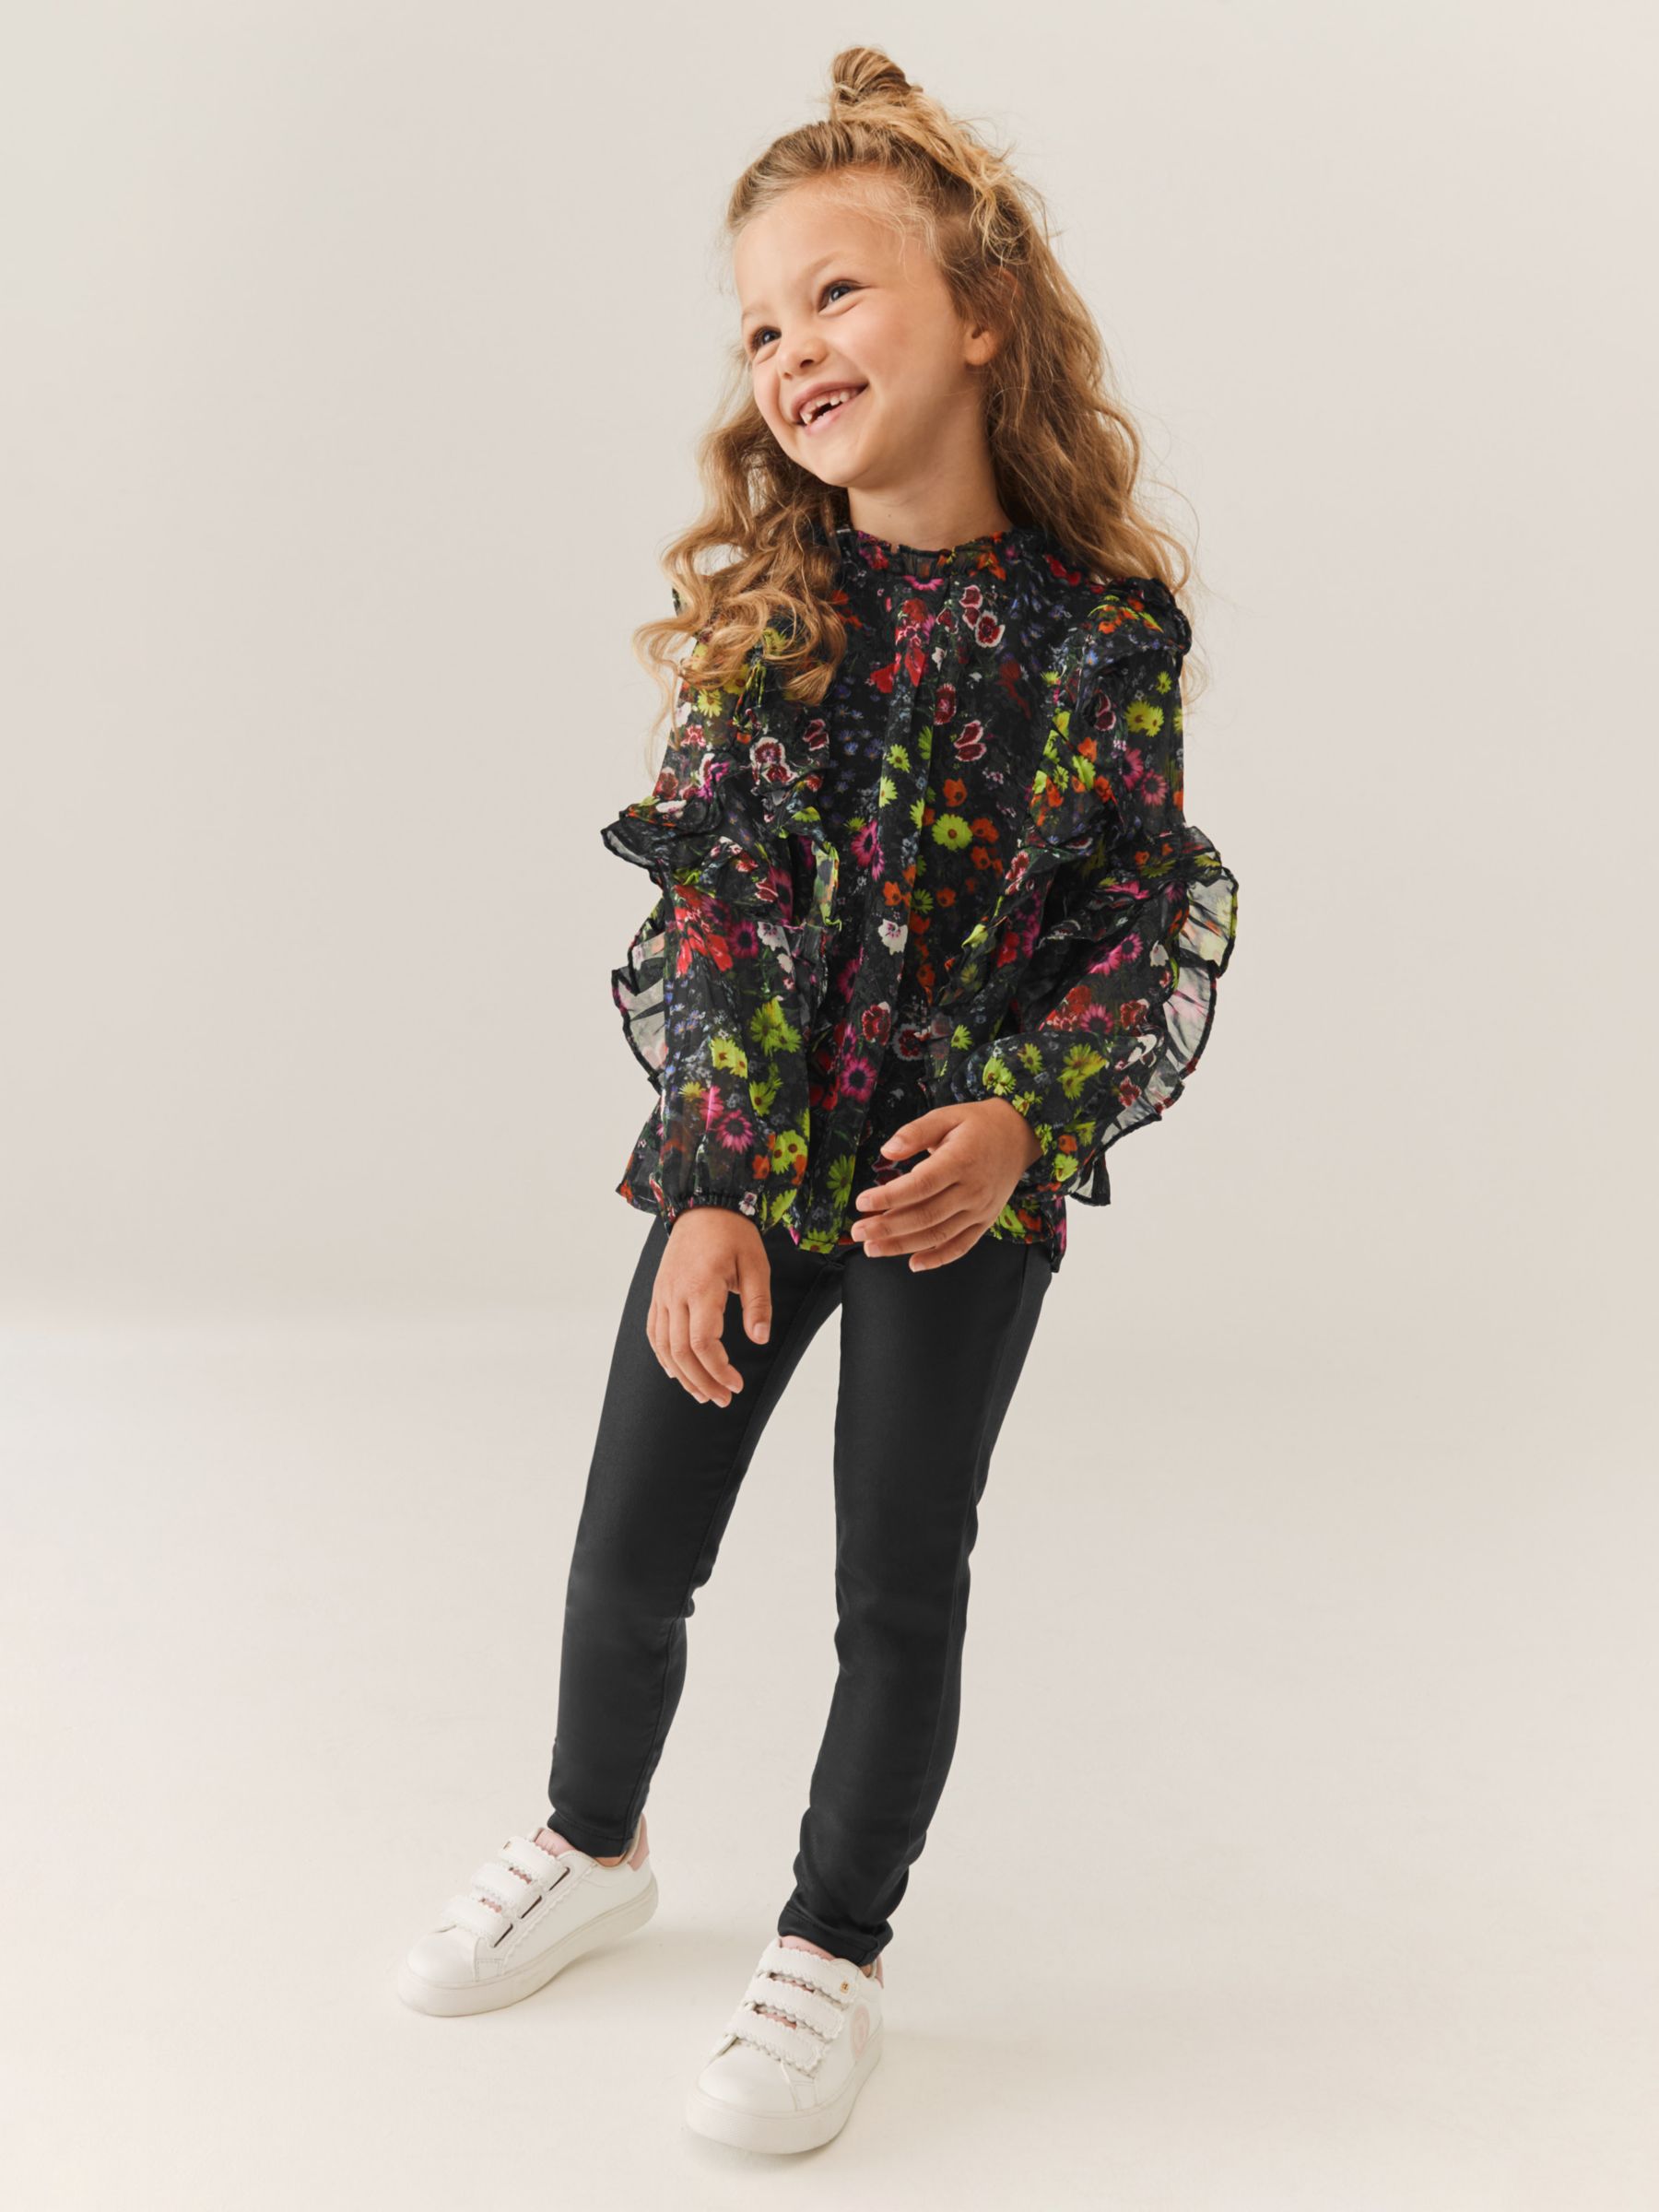 Ted Baker Kids' Floral Chiffon Blouse & Leather Look Legging Set, Black/Multi,  4 years